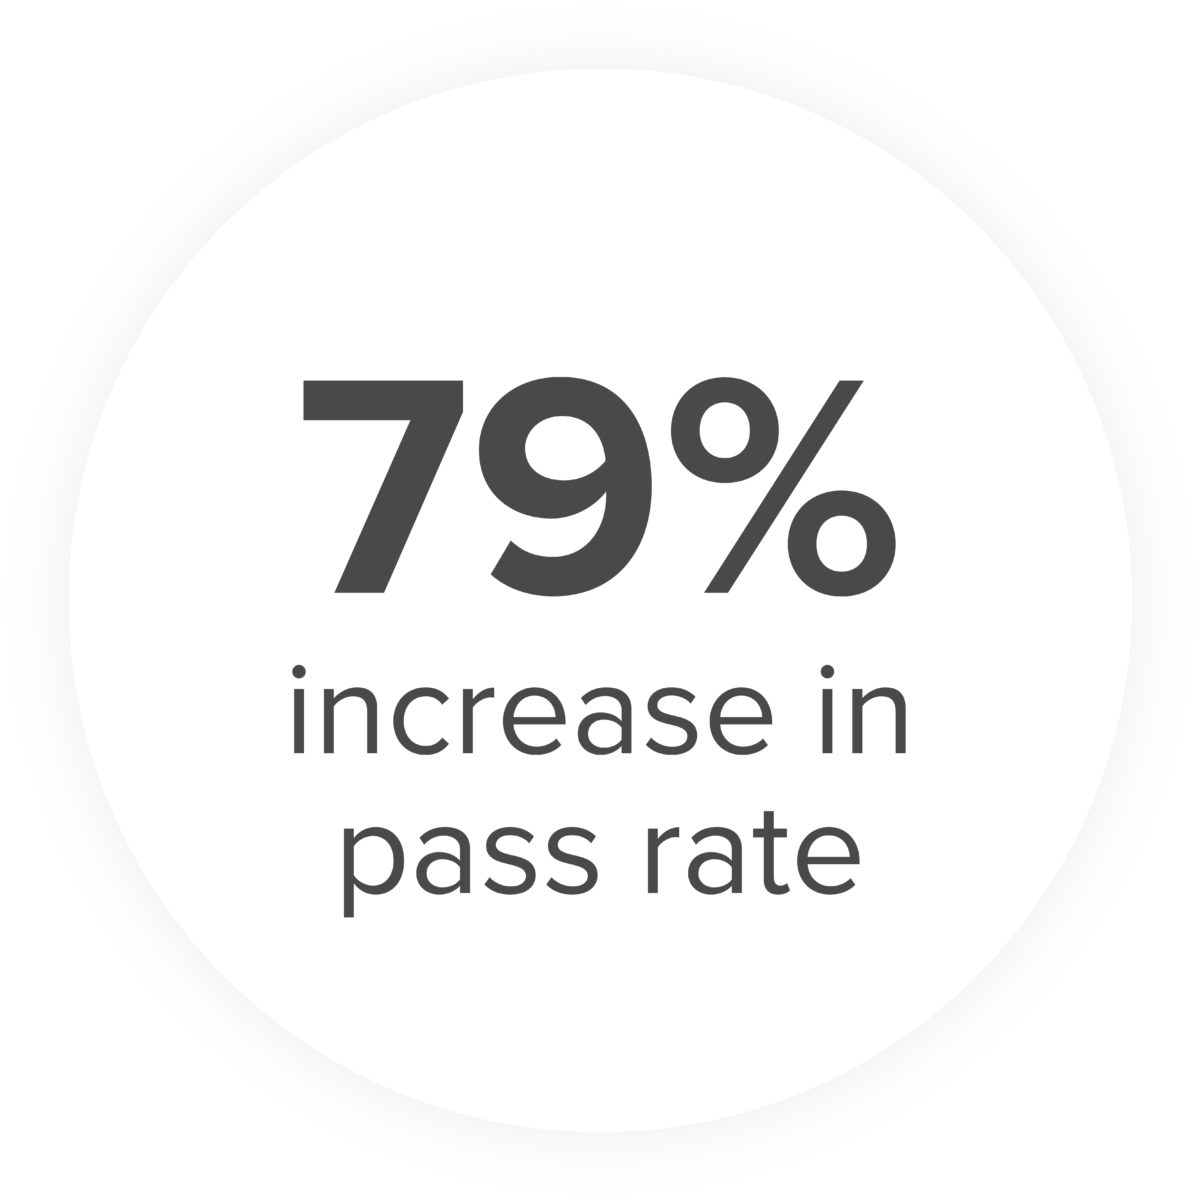 79% increase in pass rate image